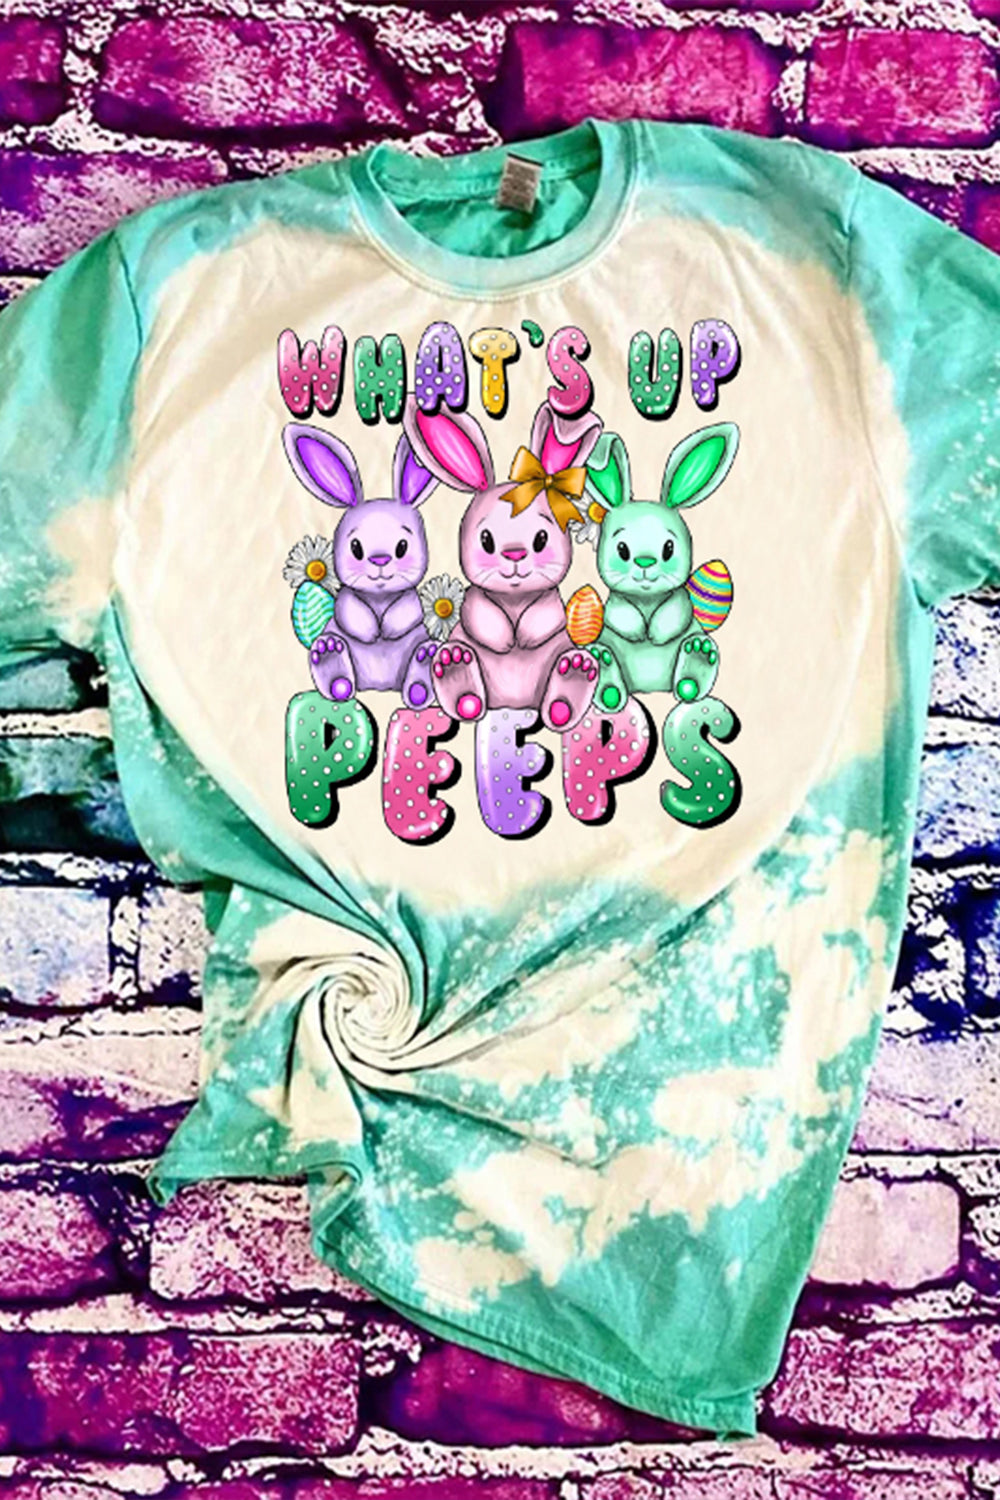 What's Up Easter Day Bunnies Eggs Round Neck Short Sleeve T-shirt